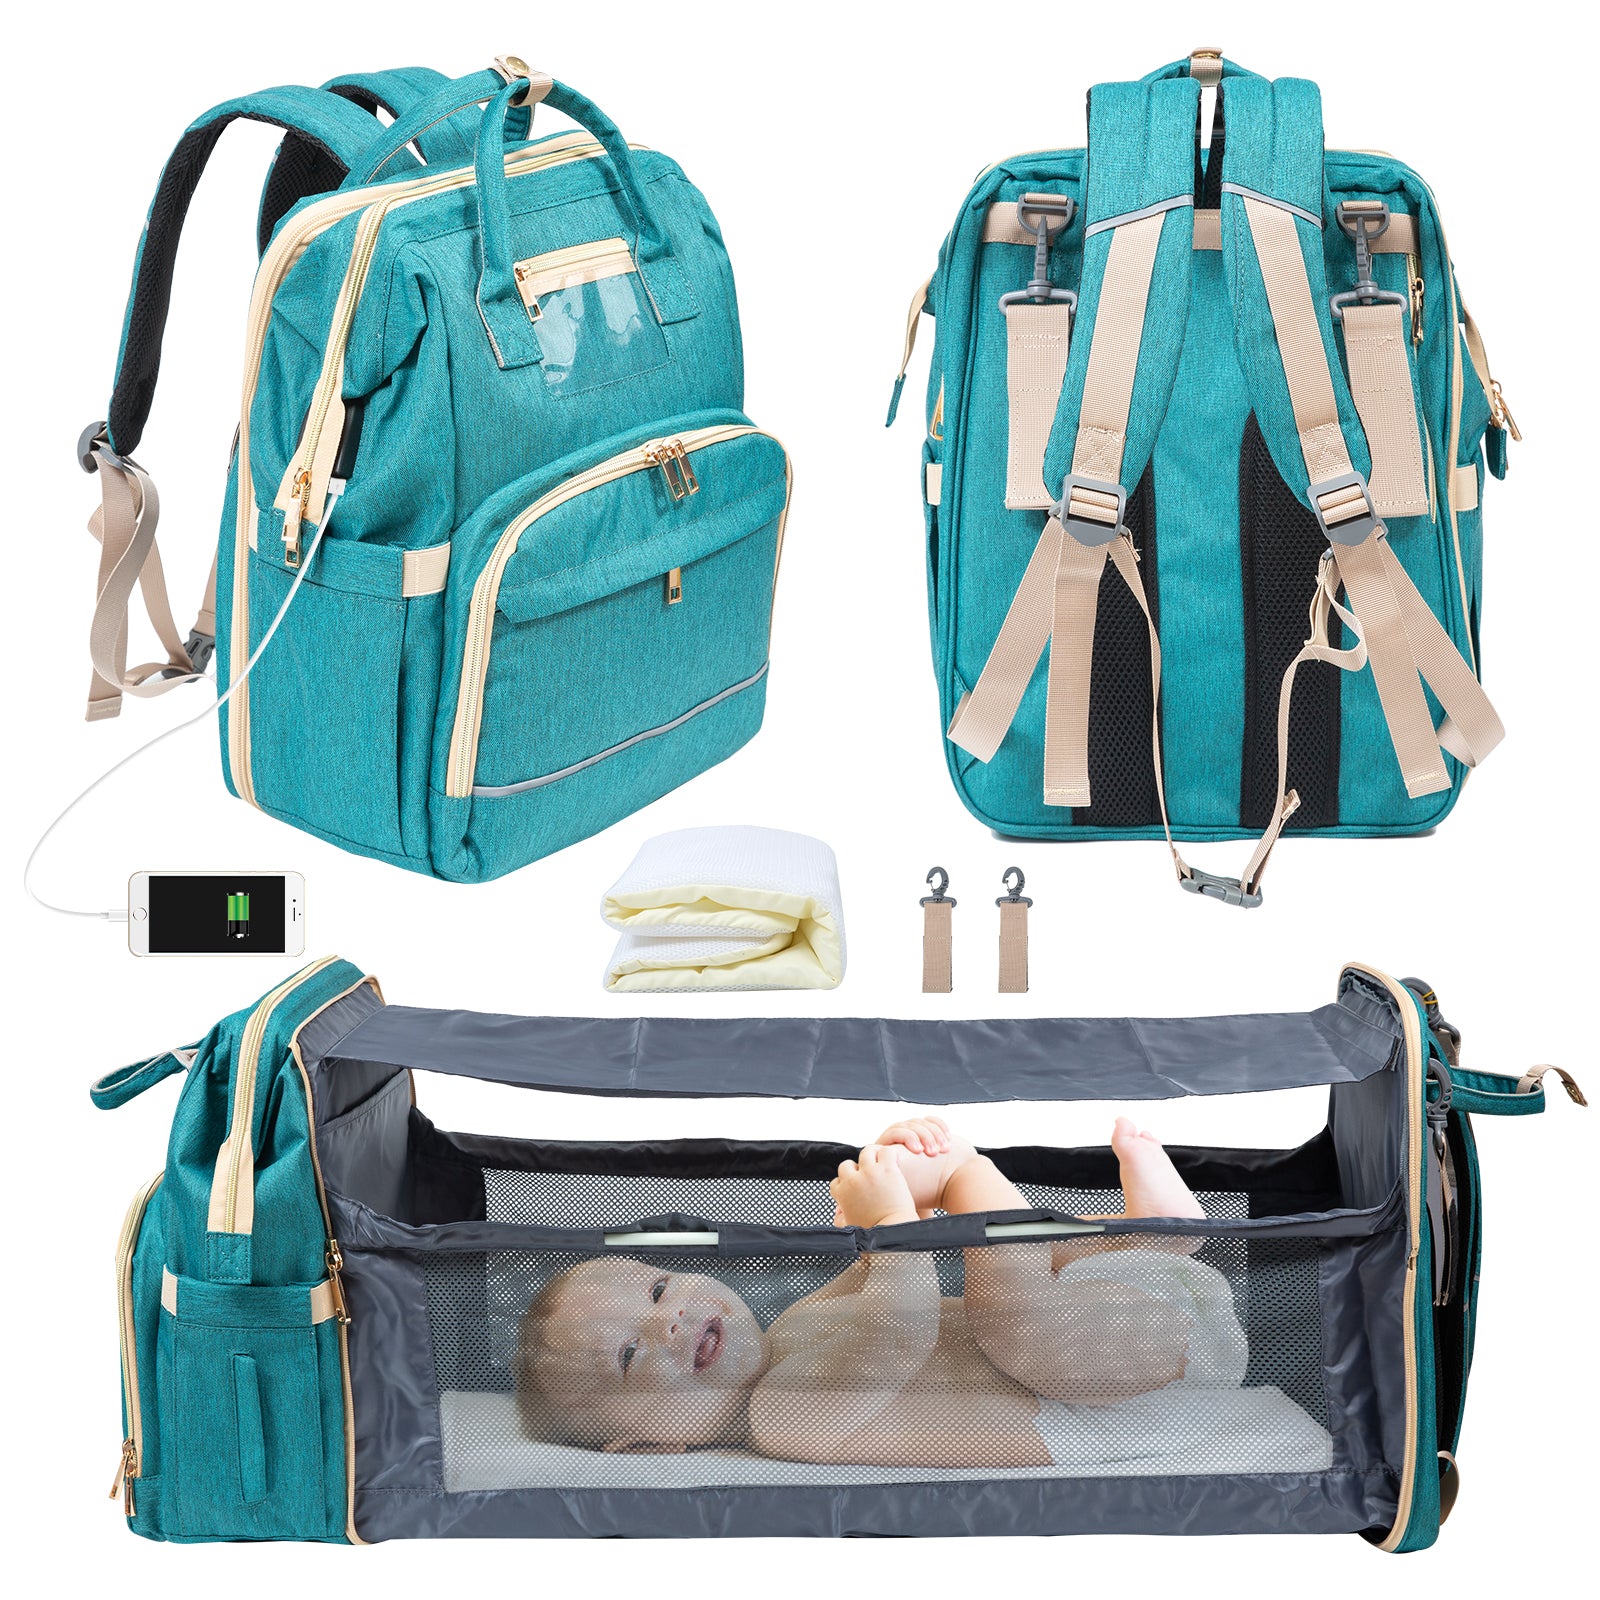 Diaper Bag Backpack, Portable Travel Mommy Bag with Changing